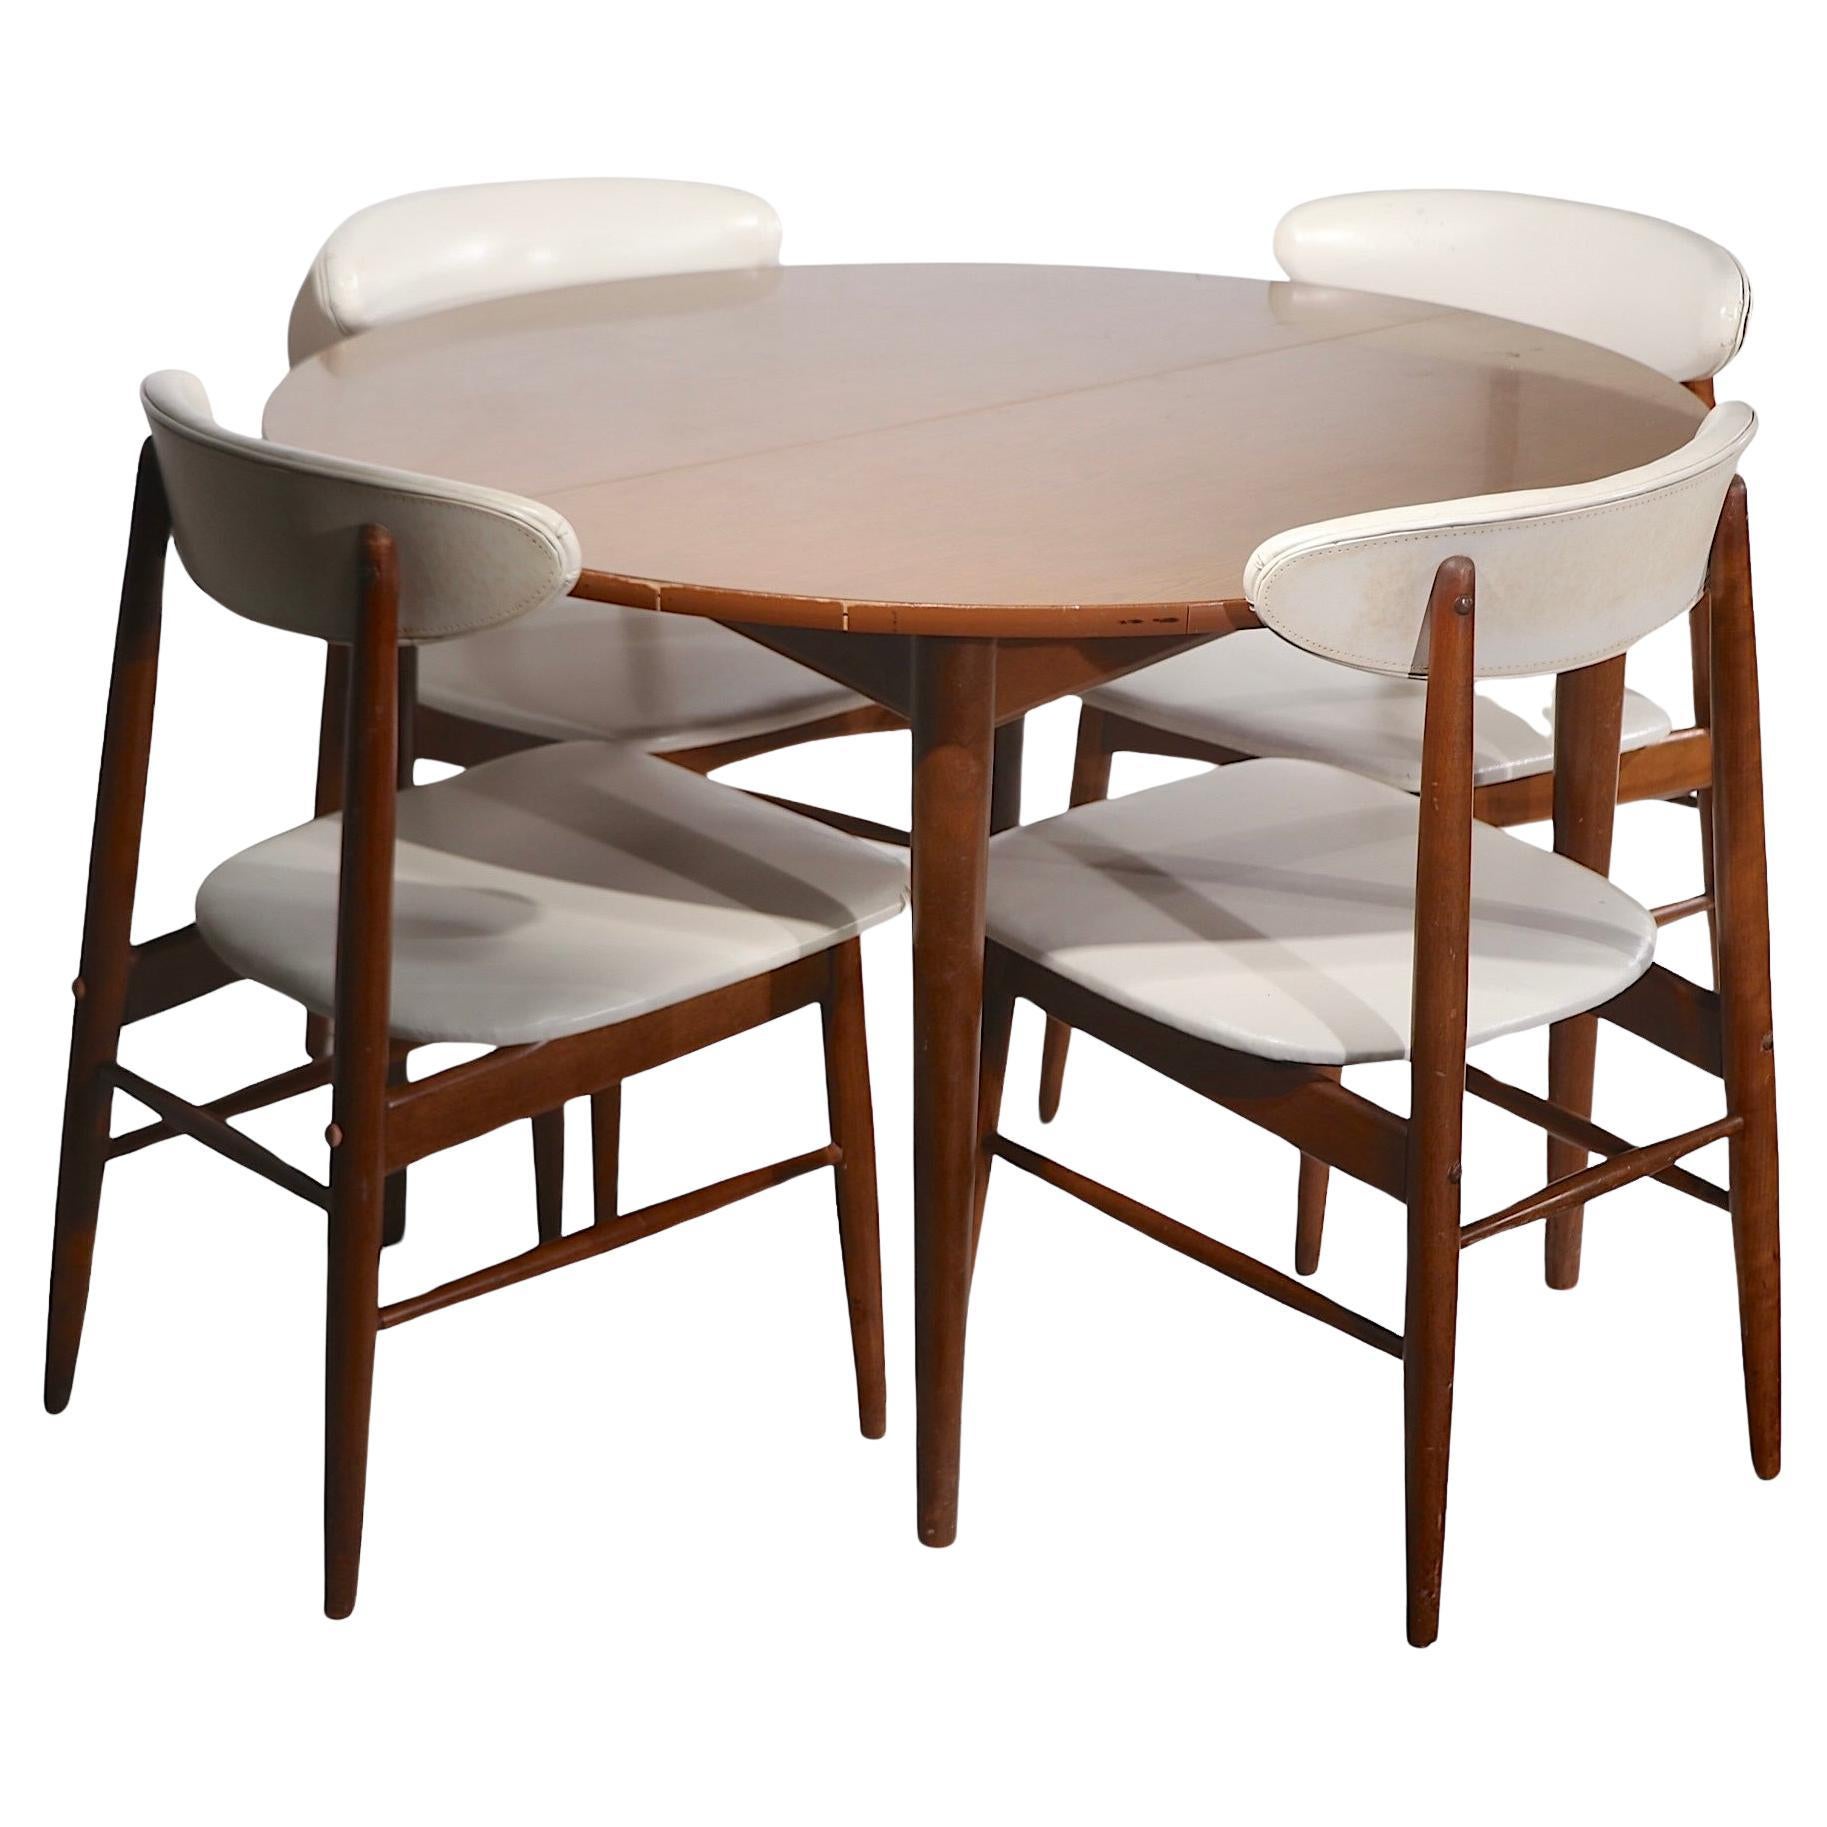 5 pc Mid Century Dinette Set by Viko Baumritter c 1950’s For Sale